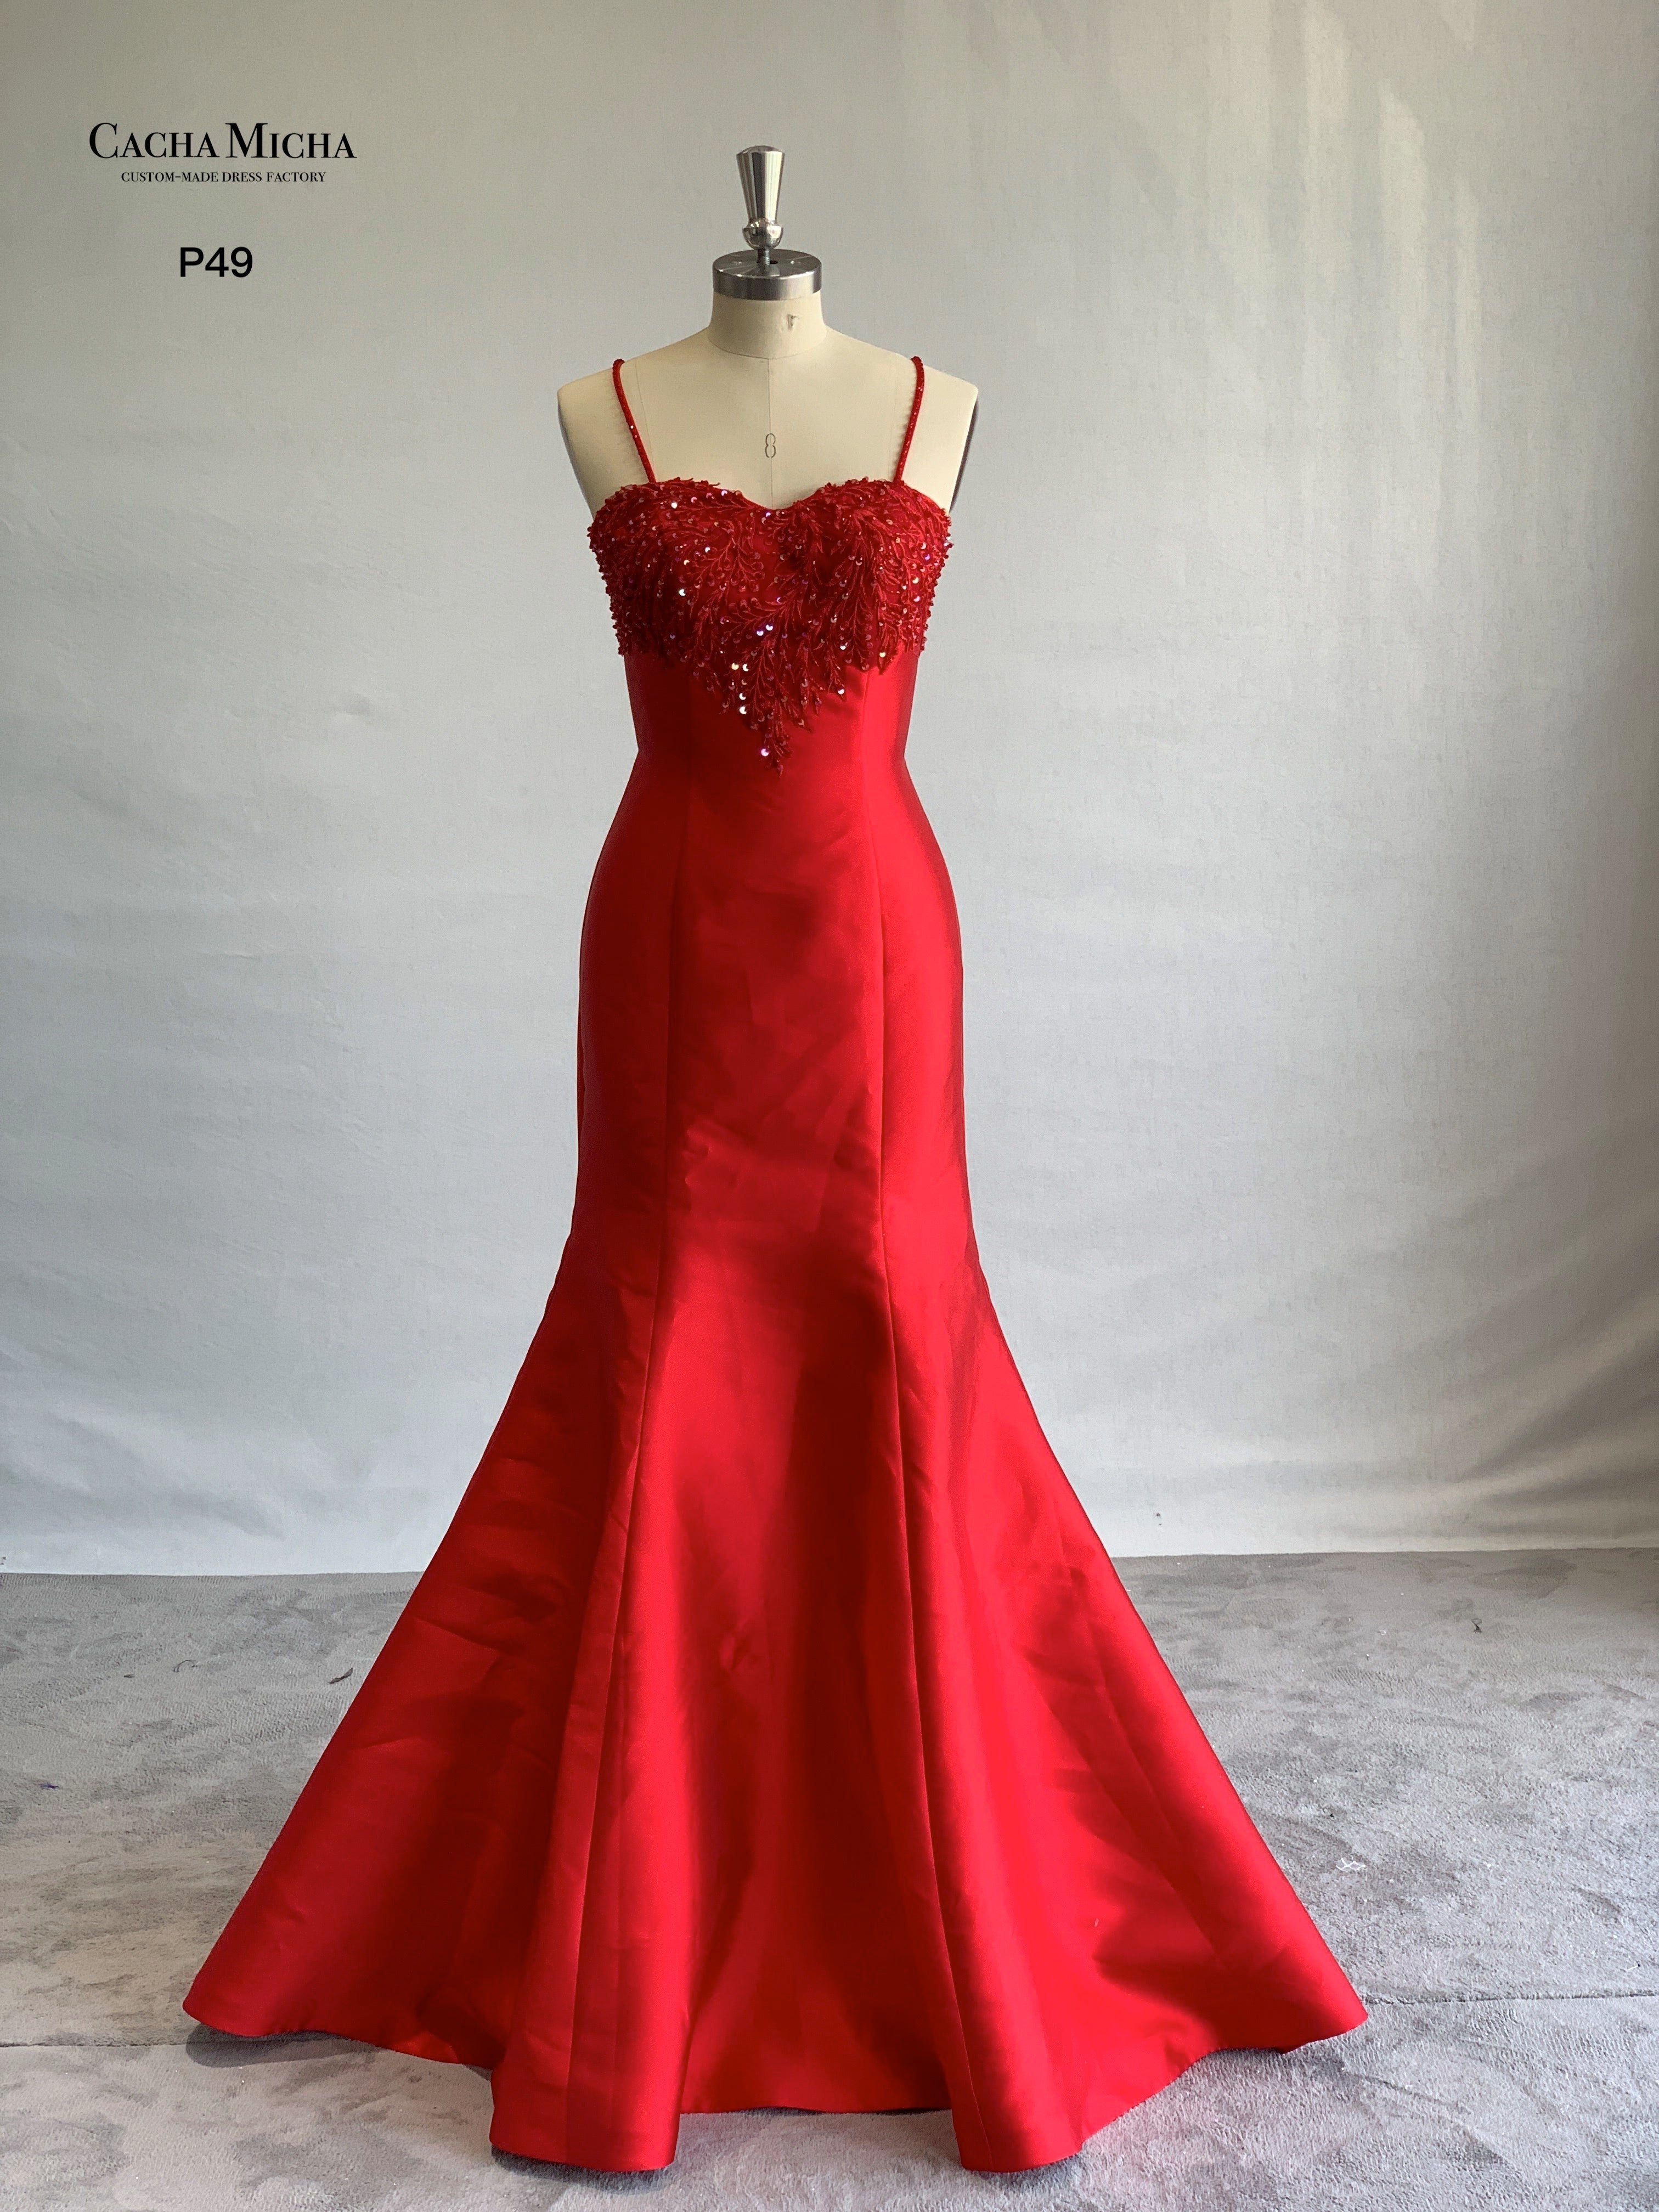 Sexy Open Back Red Mikado Prom Dress P49